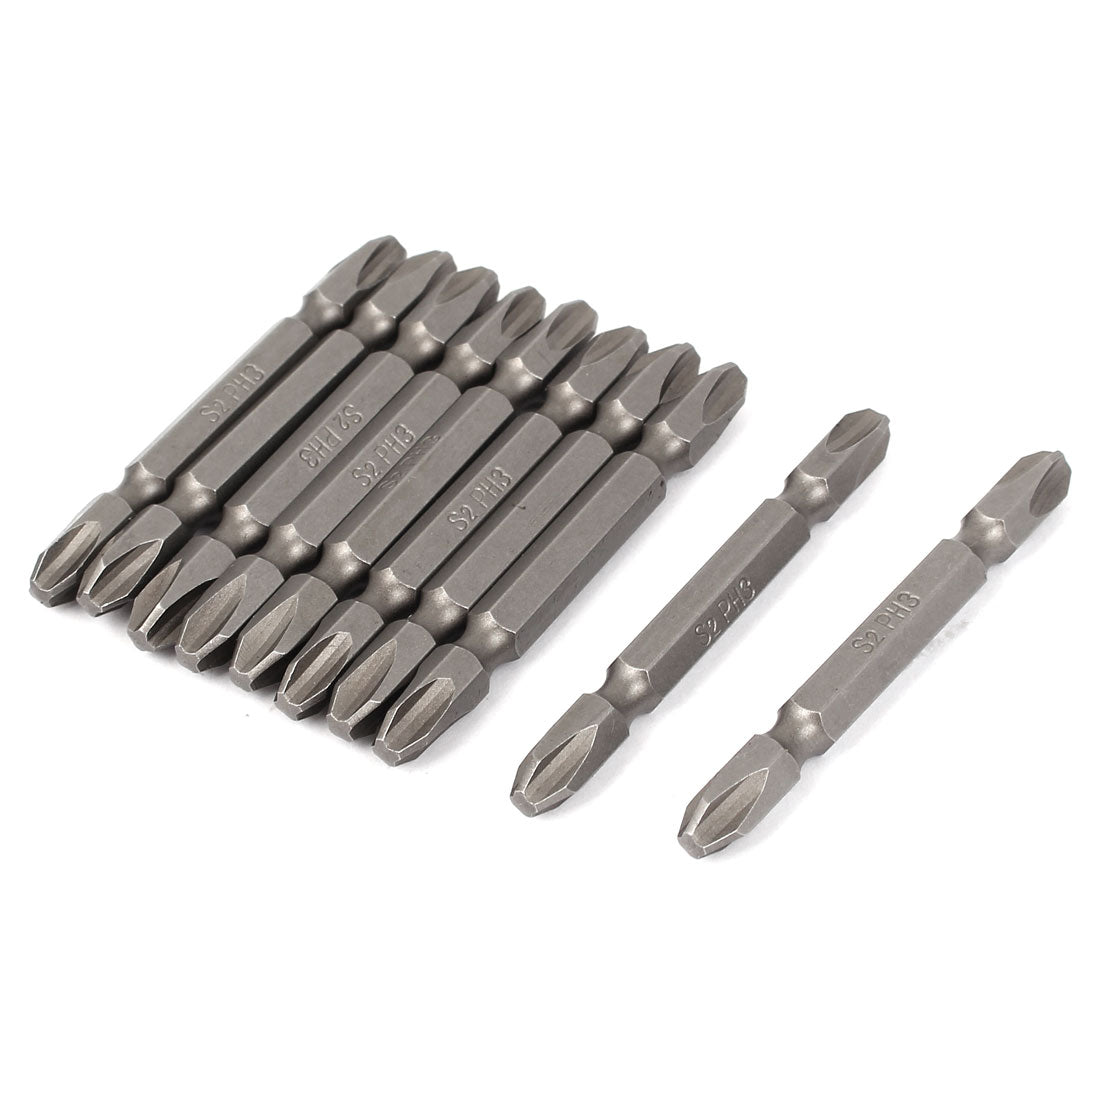 Uxcell Uxcell 10PCS 1/4" Hex Shank PH2 Double End Phillips Screwdriver Bits 50mm Length